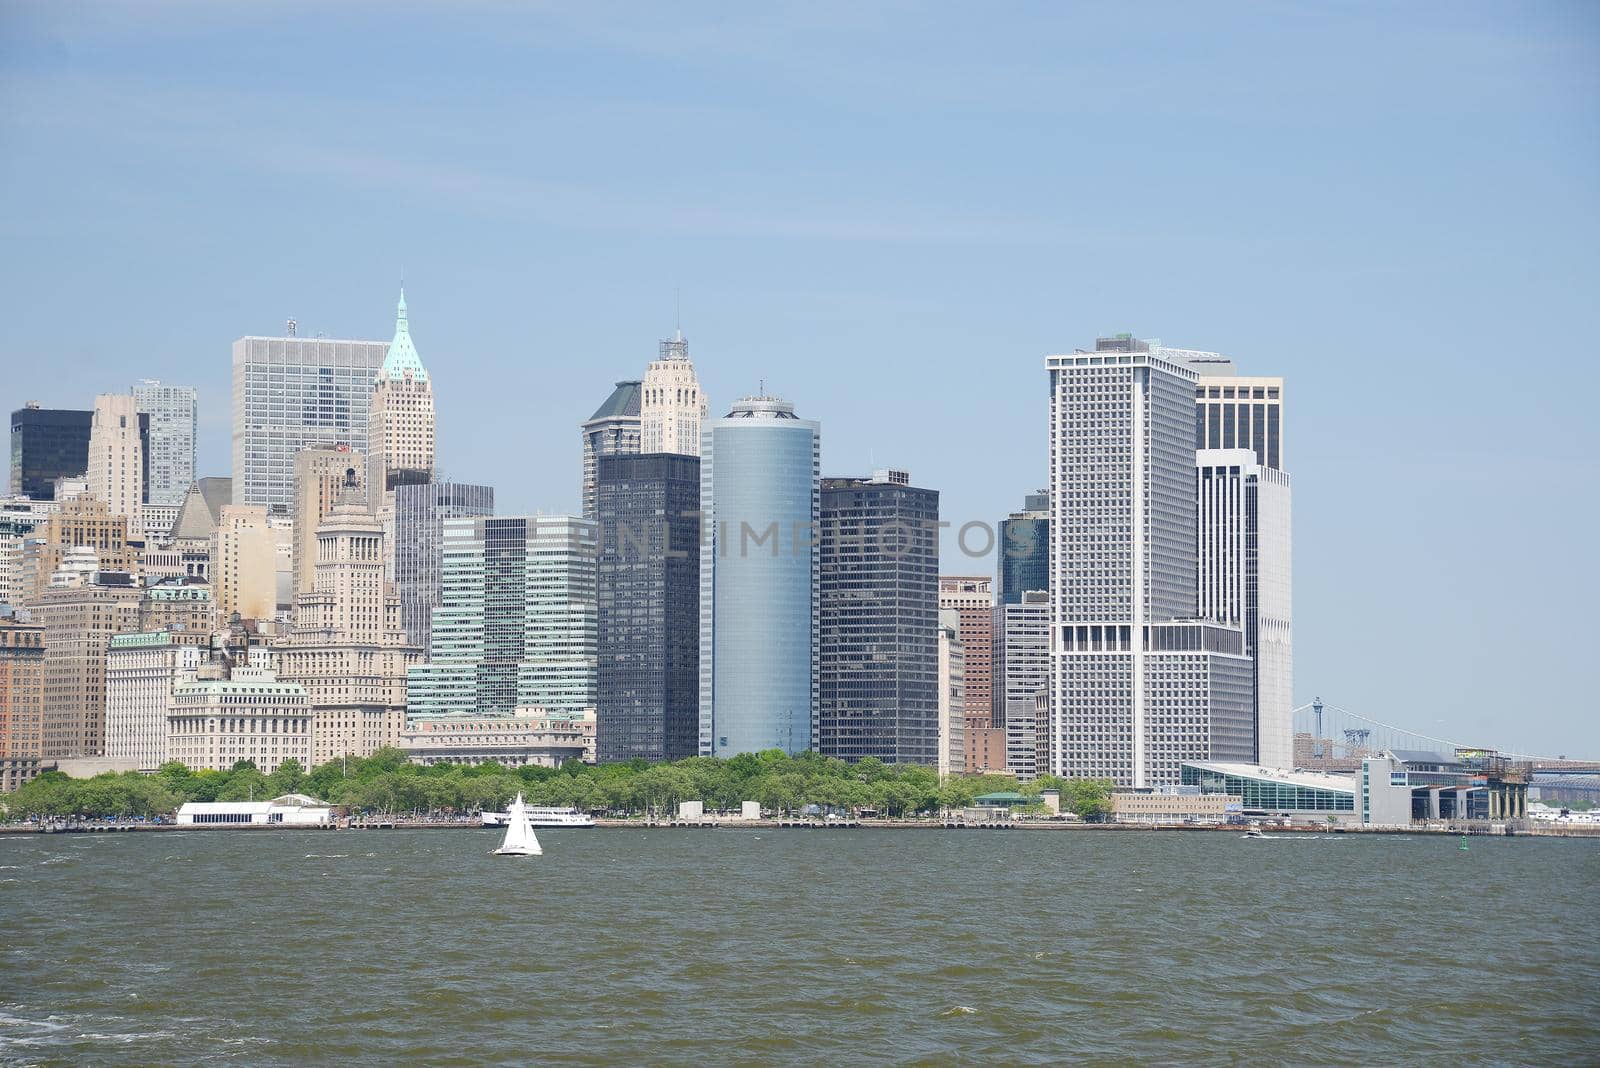 building and skyline of downtown manhattan during daytime as seen from a boat